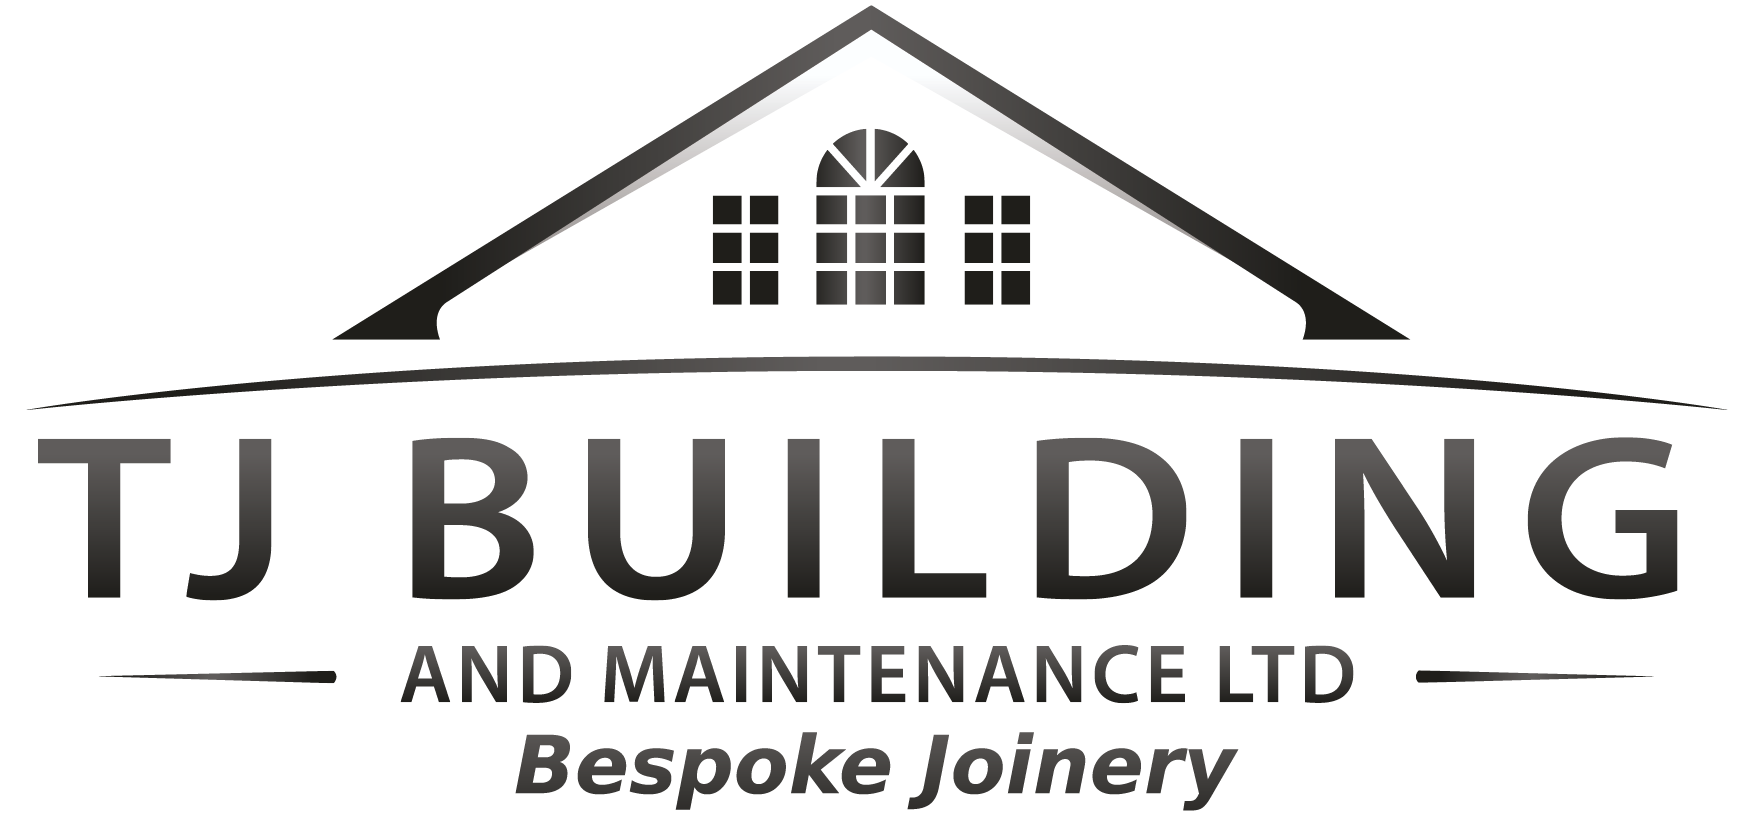 TJ Building and Maintenance We are one of the top residential building companies in London with over 15 years experience.  As experienced building contractors, we know that your home is your castle.